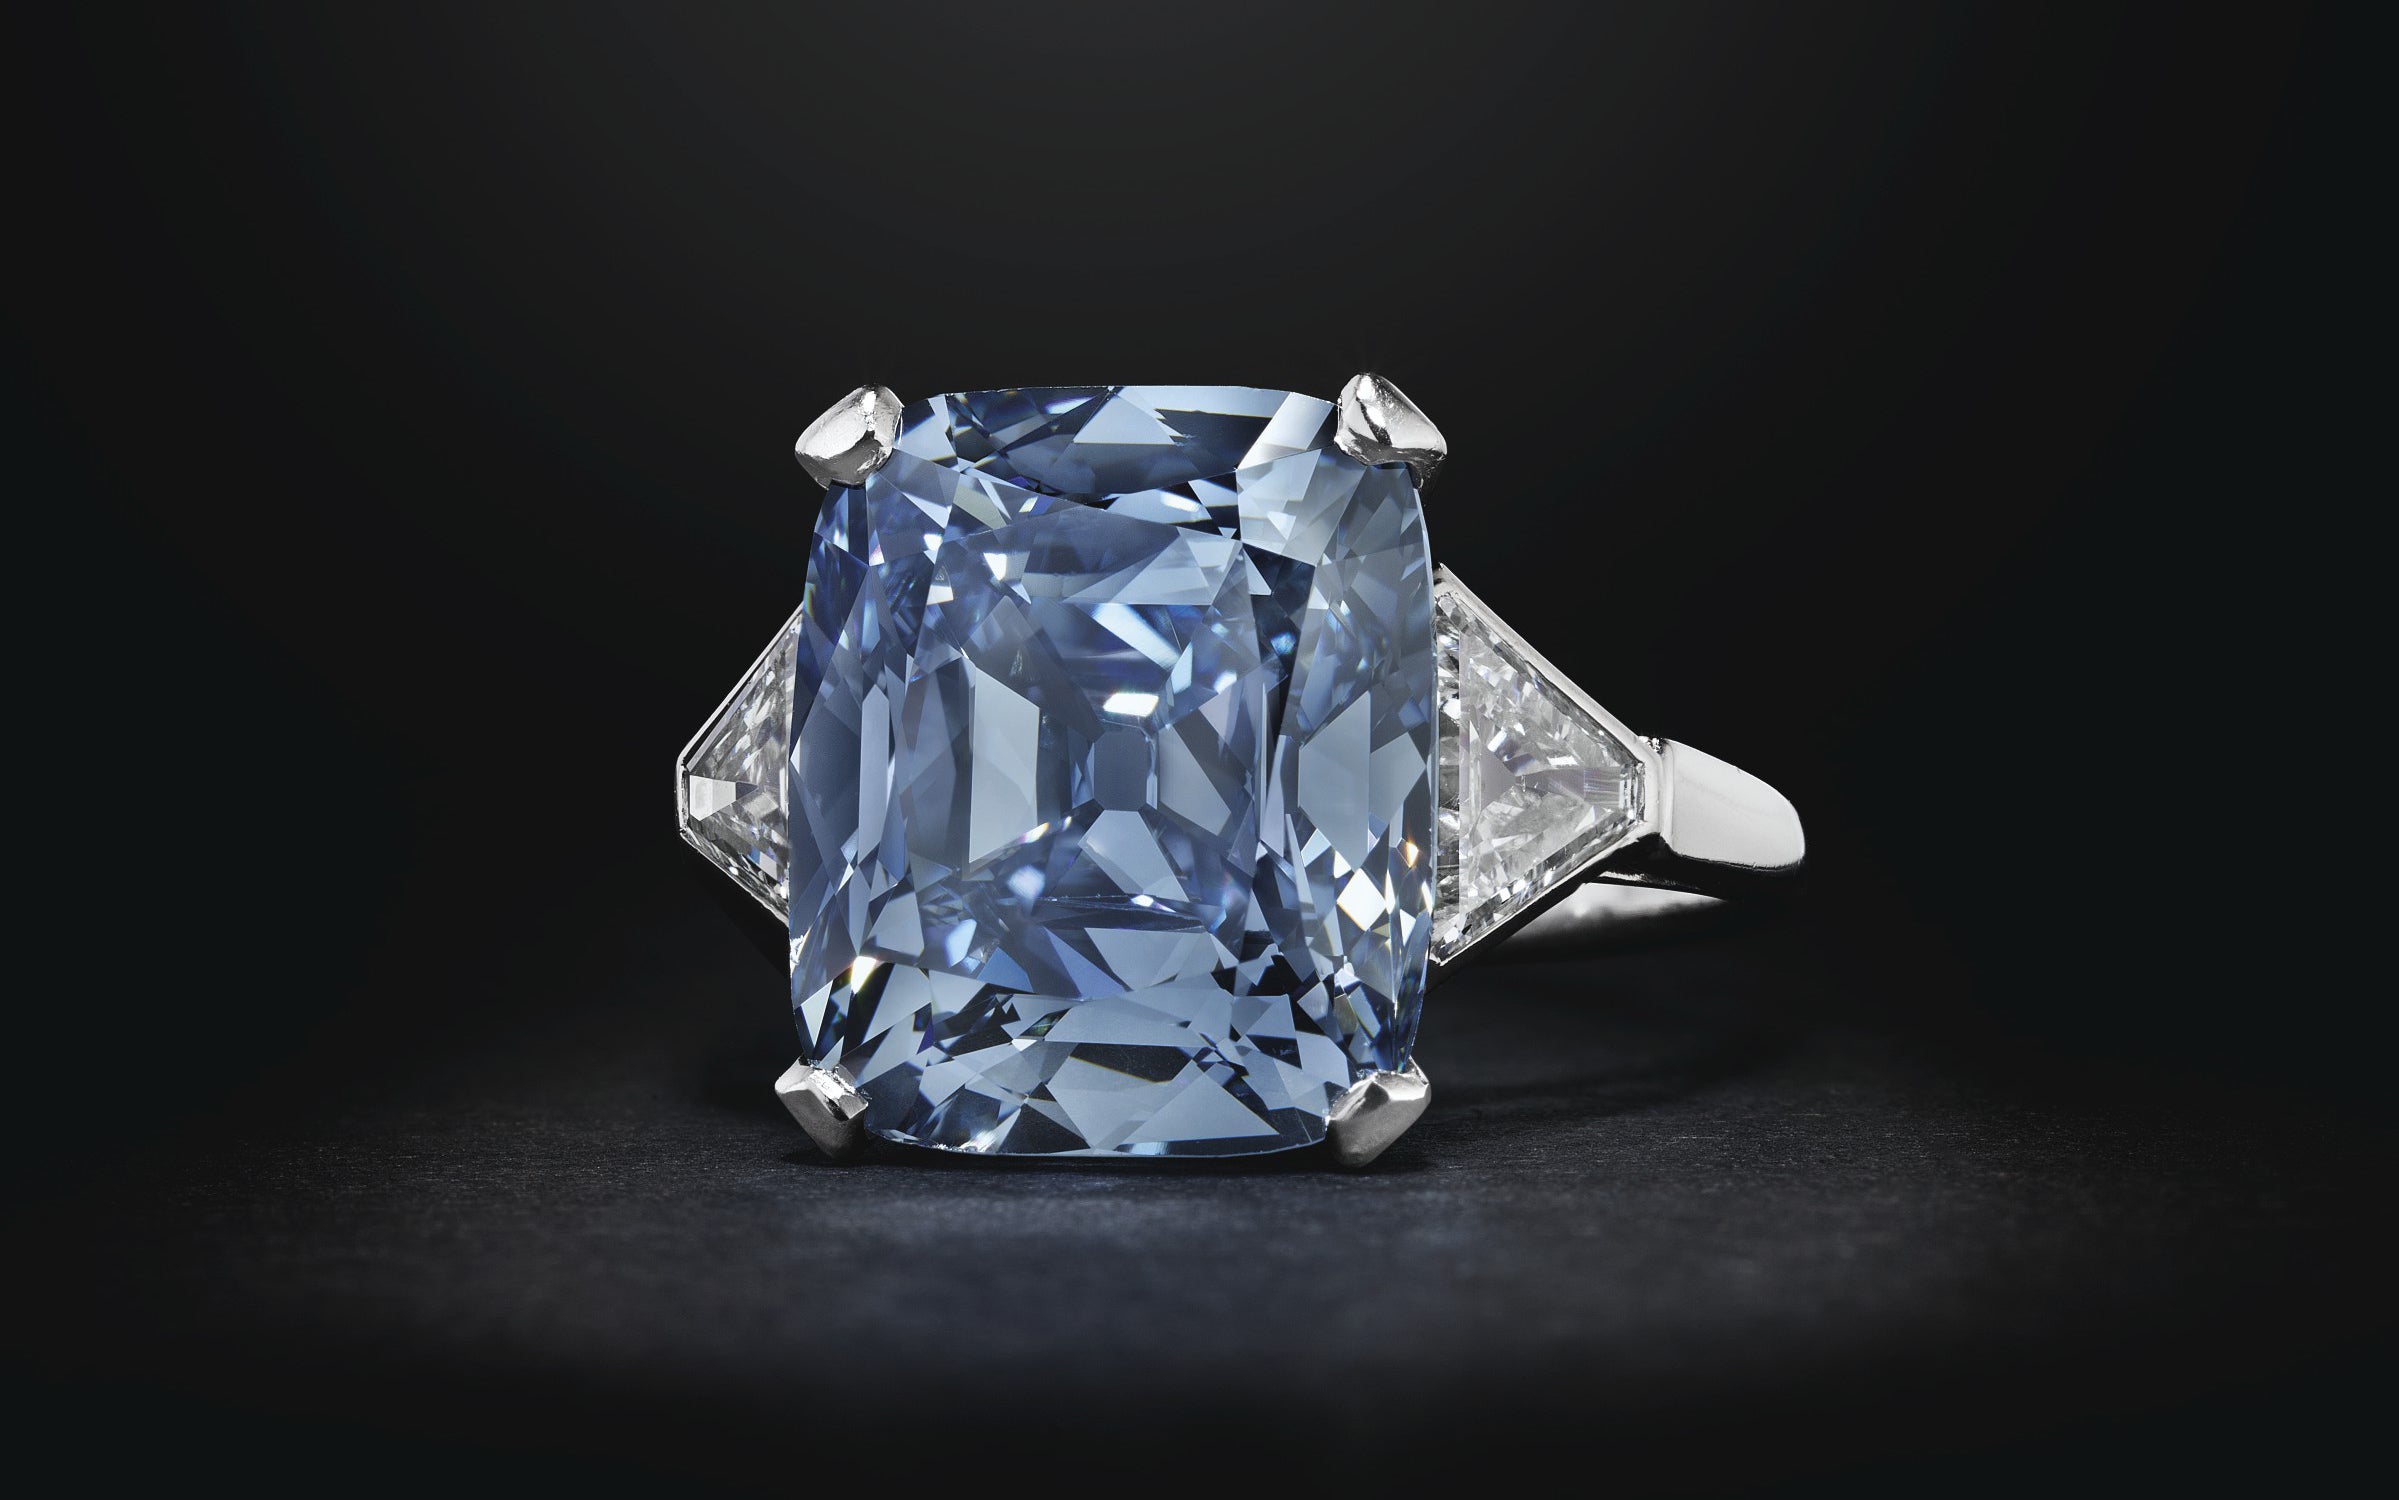 Top 15 of Natural Color Diamonds that Made the Headlines in 2018